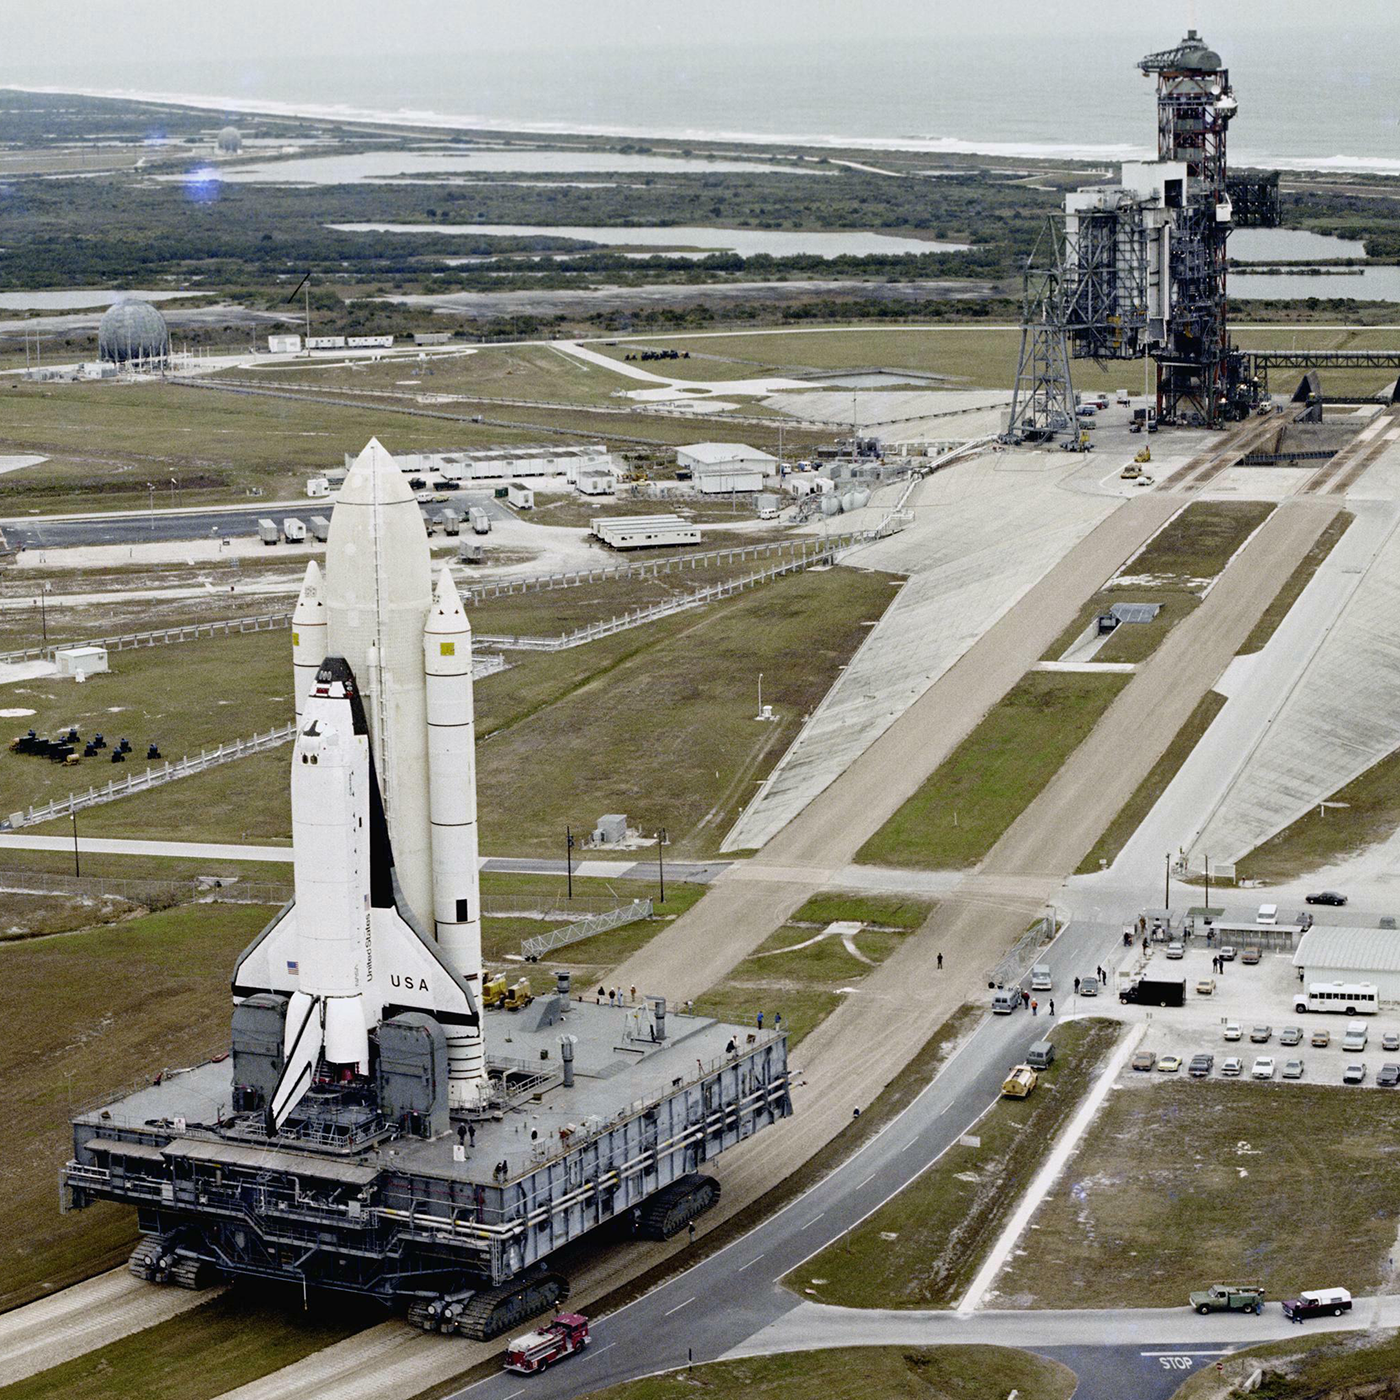 Space Policy Edition: Was the Space Shuttle a policy failure?